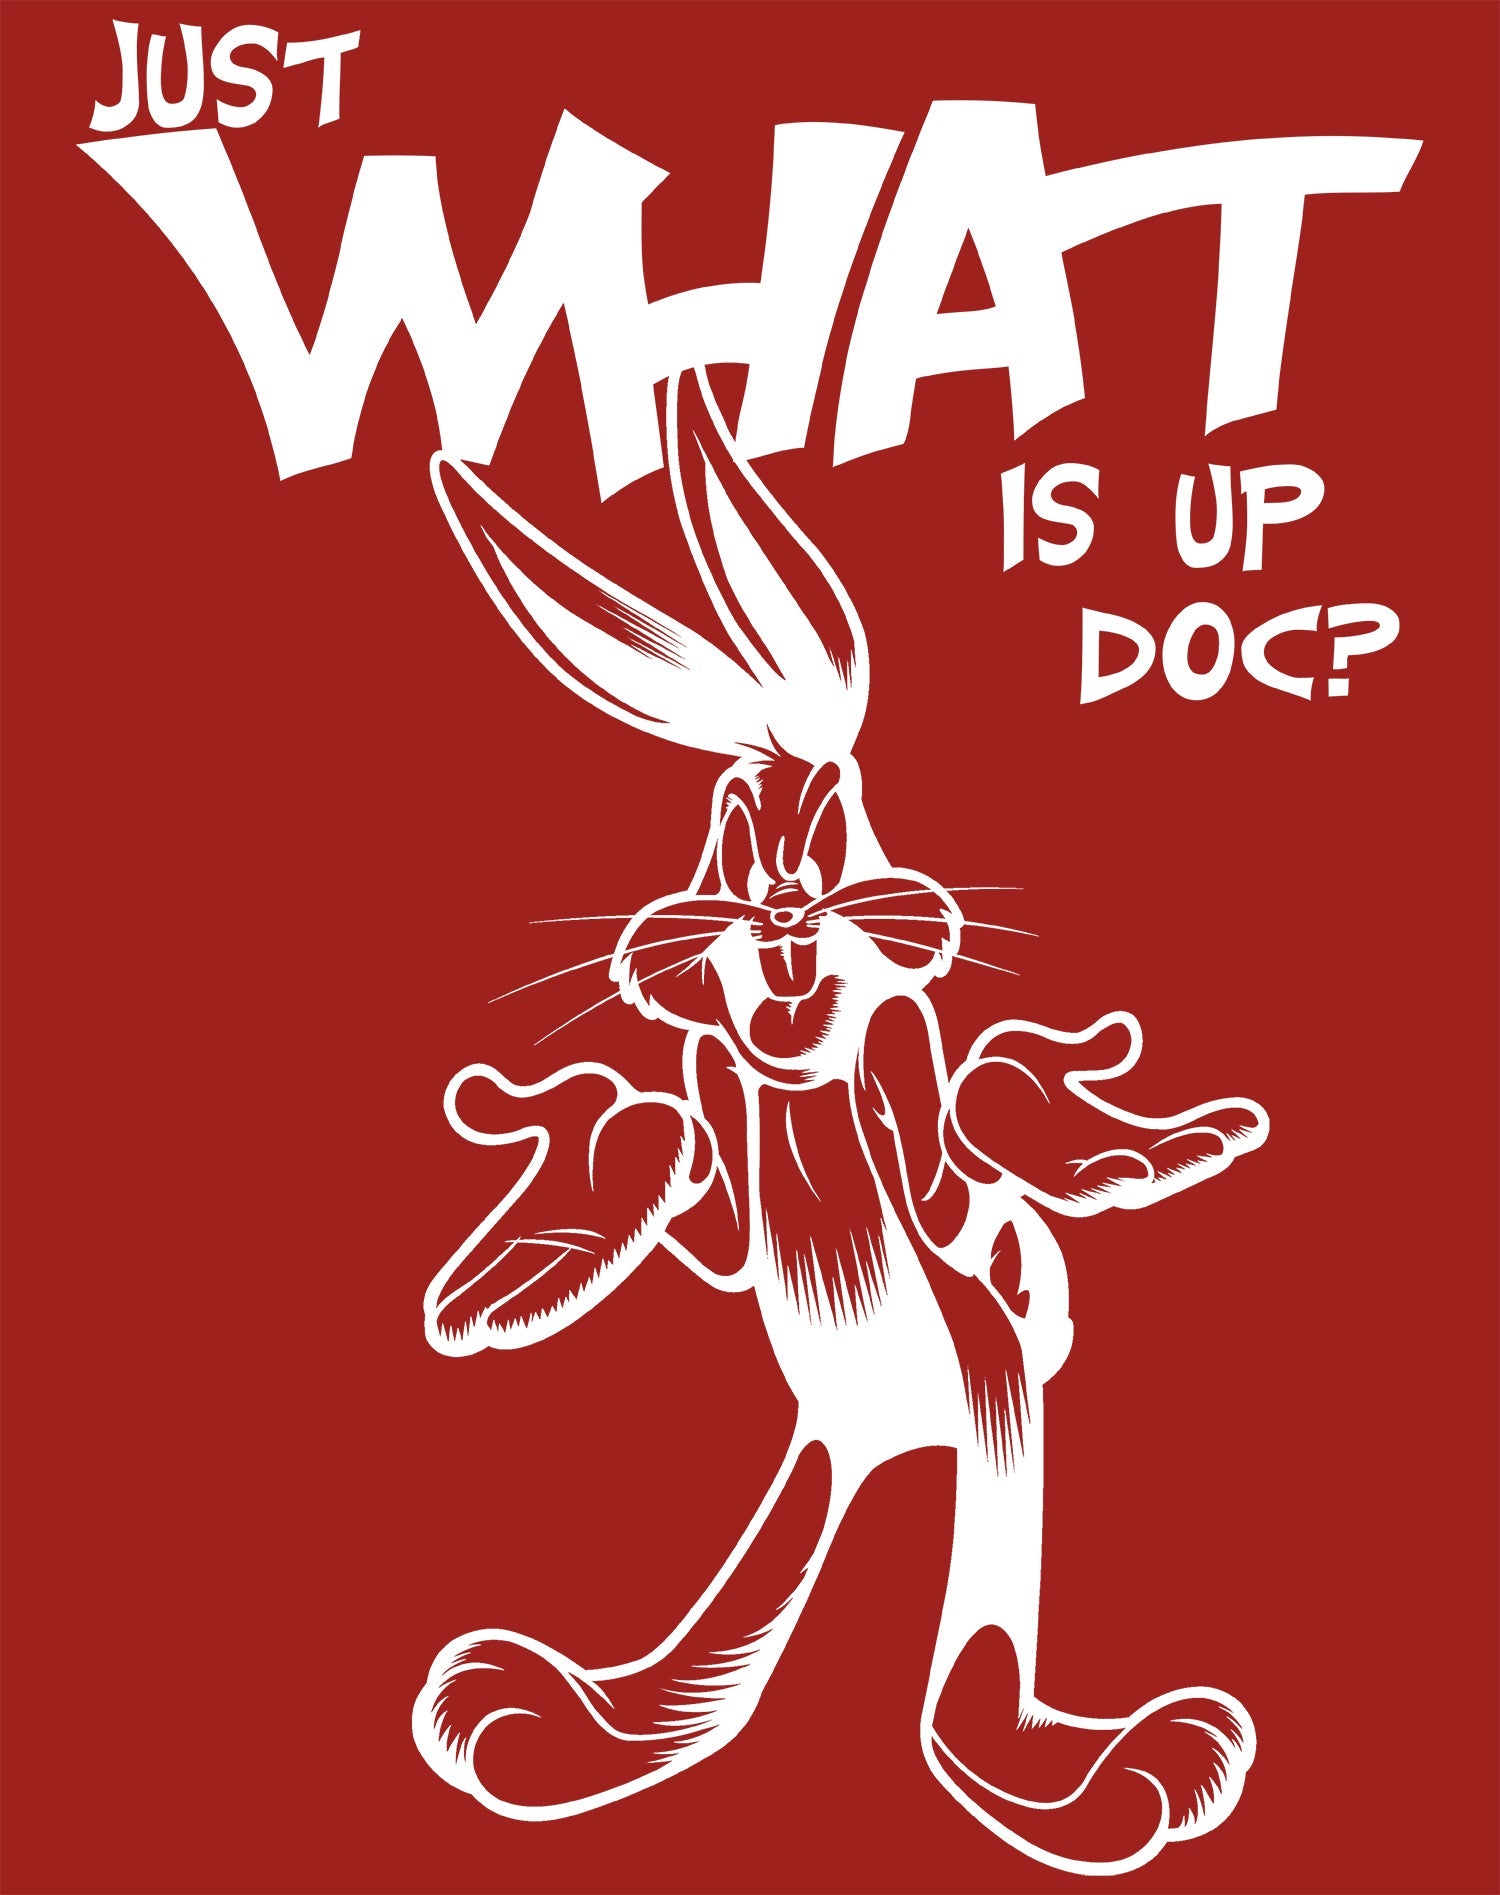 Looney Tunes Bugs Bunny Line Whats Up Doc Official Men's T-shirt